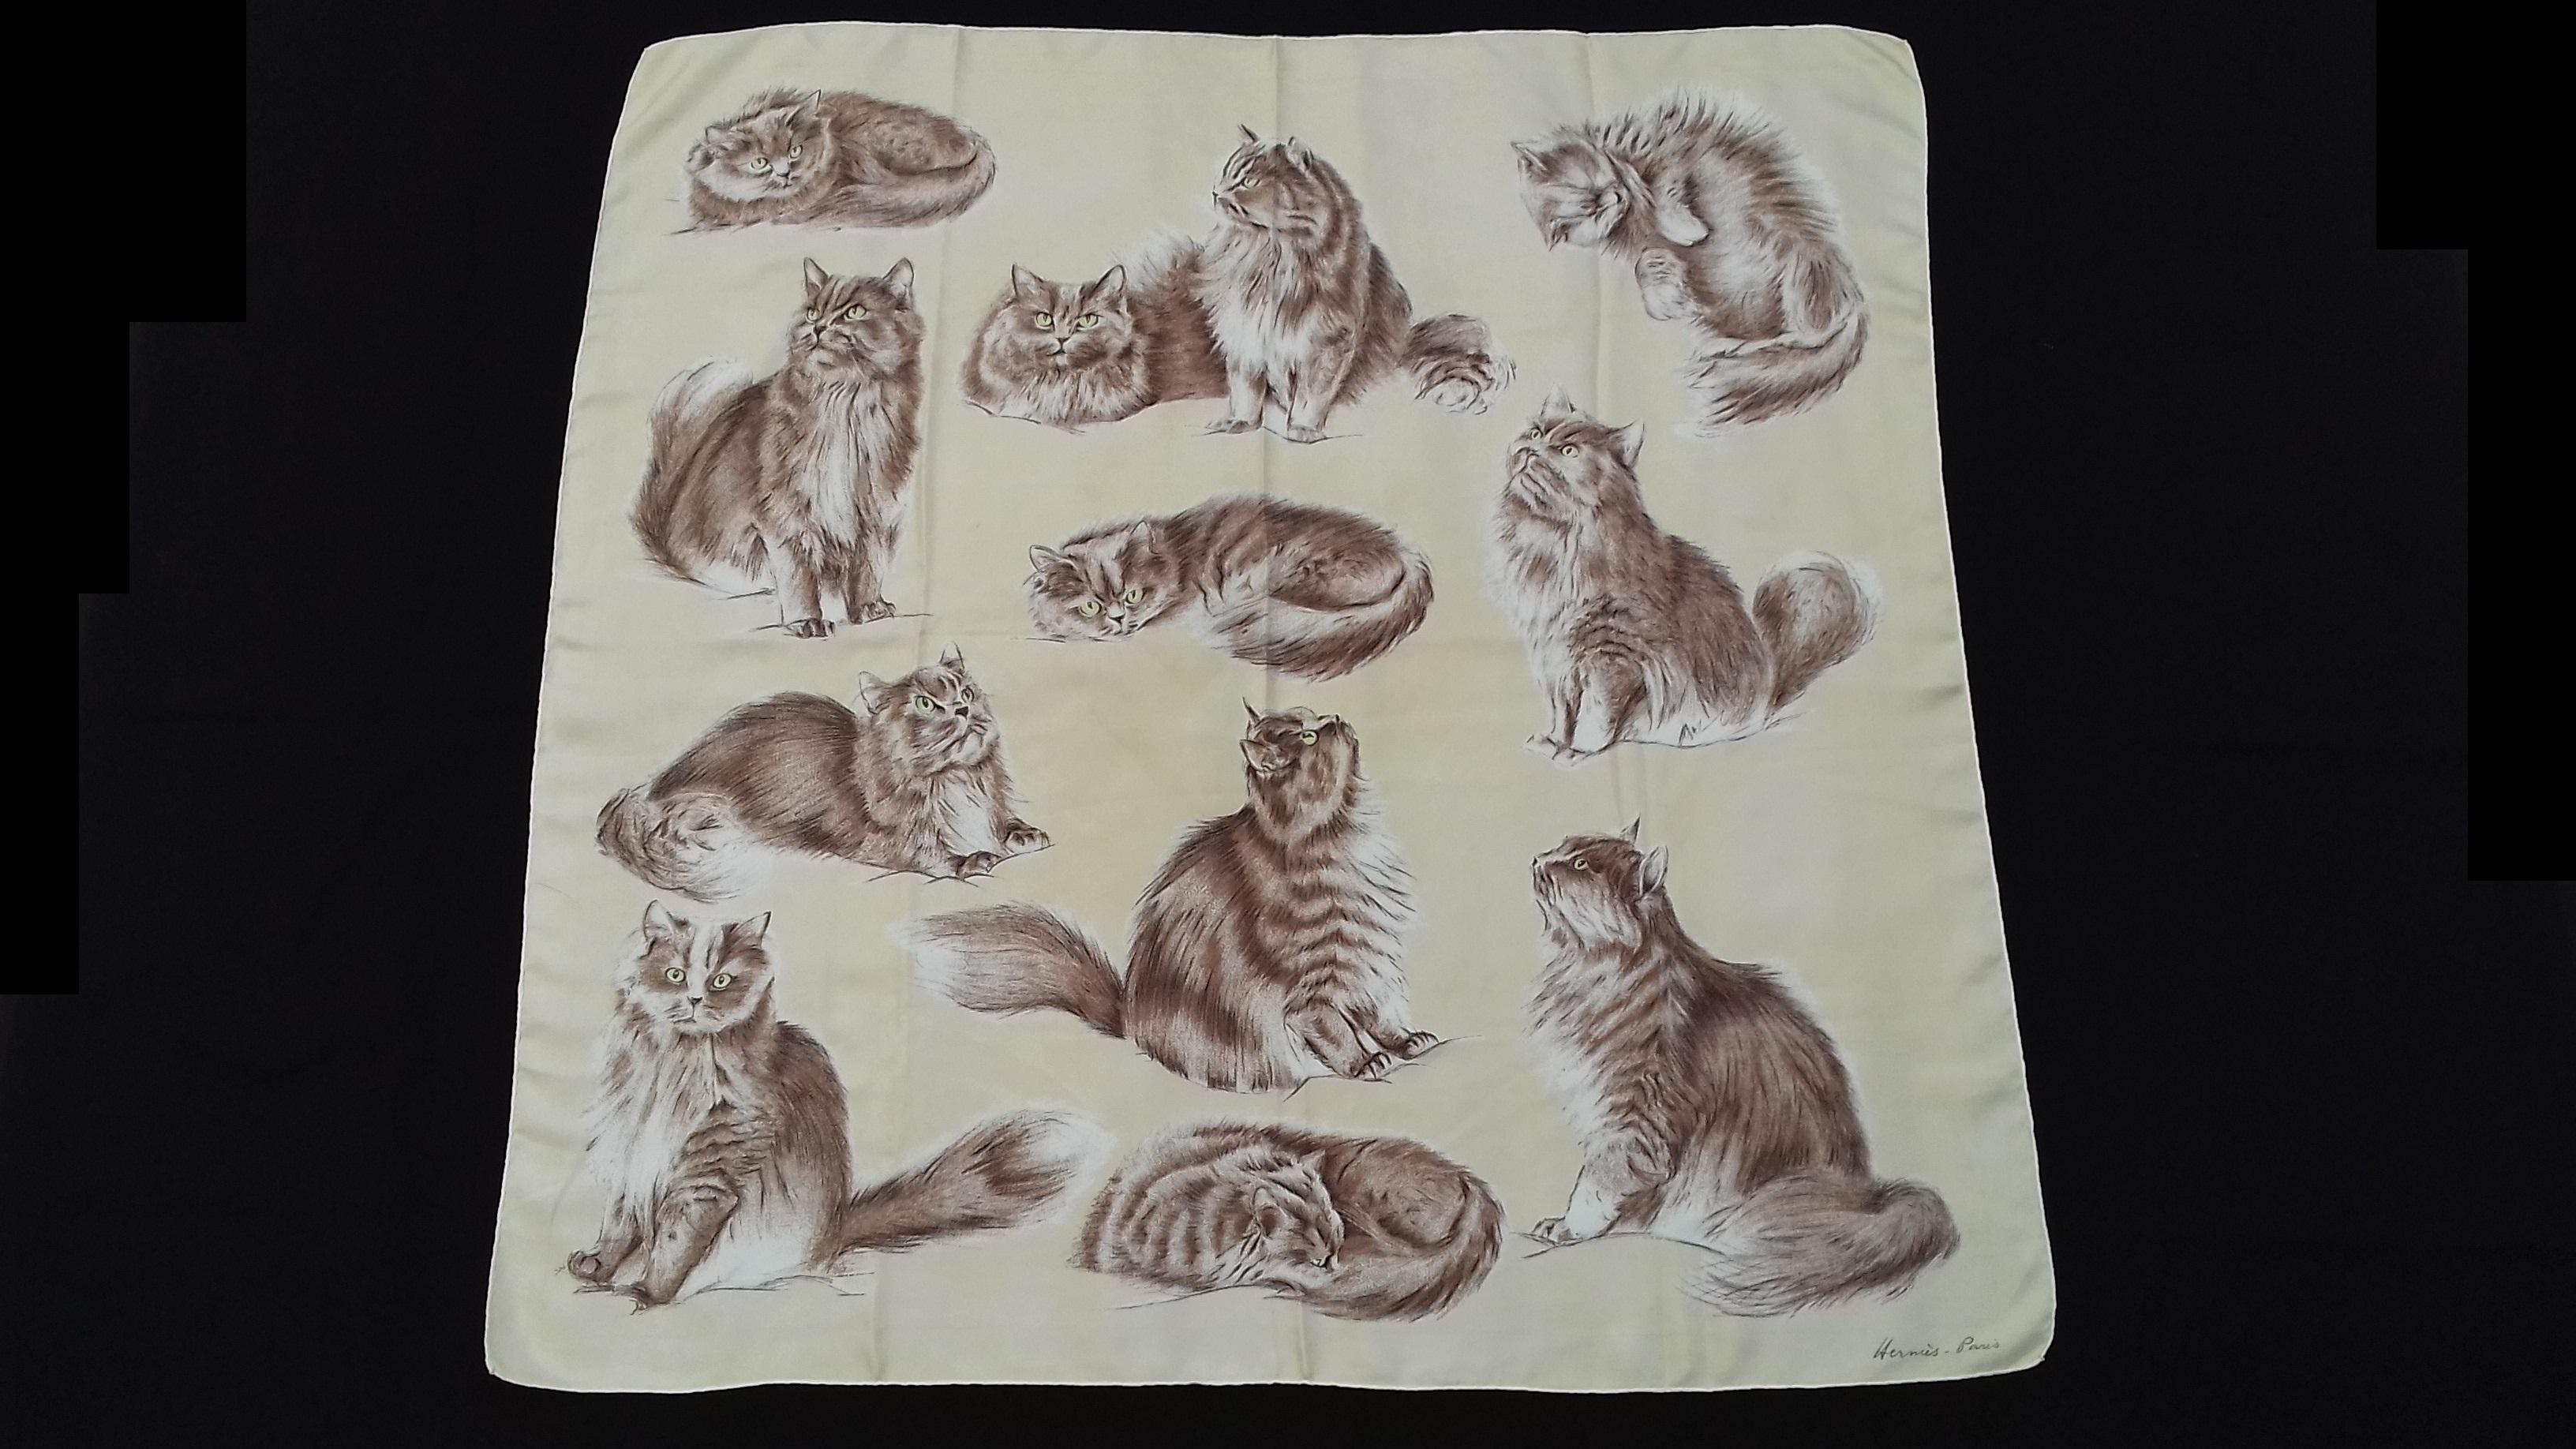 Please Notice: The background is Vanilla (issue of color rendering on photos)

Extremely Rare Authentic Hermès Vintage Scarf

Pattern: Chats Persans (Persian Cats)

Designed in 1956 by Jacques de Poret (only 1 issue)

One of the rarest Hermès